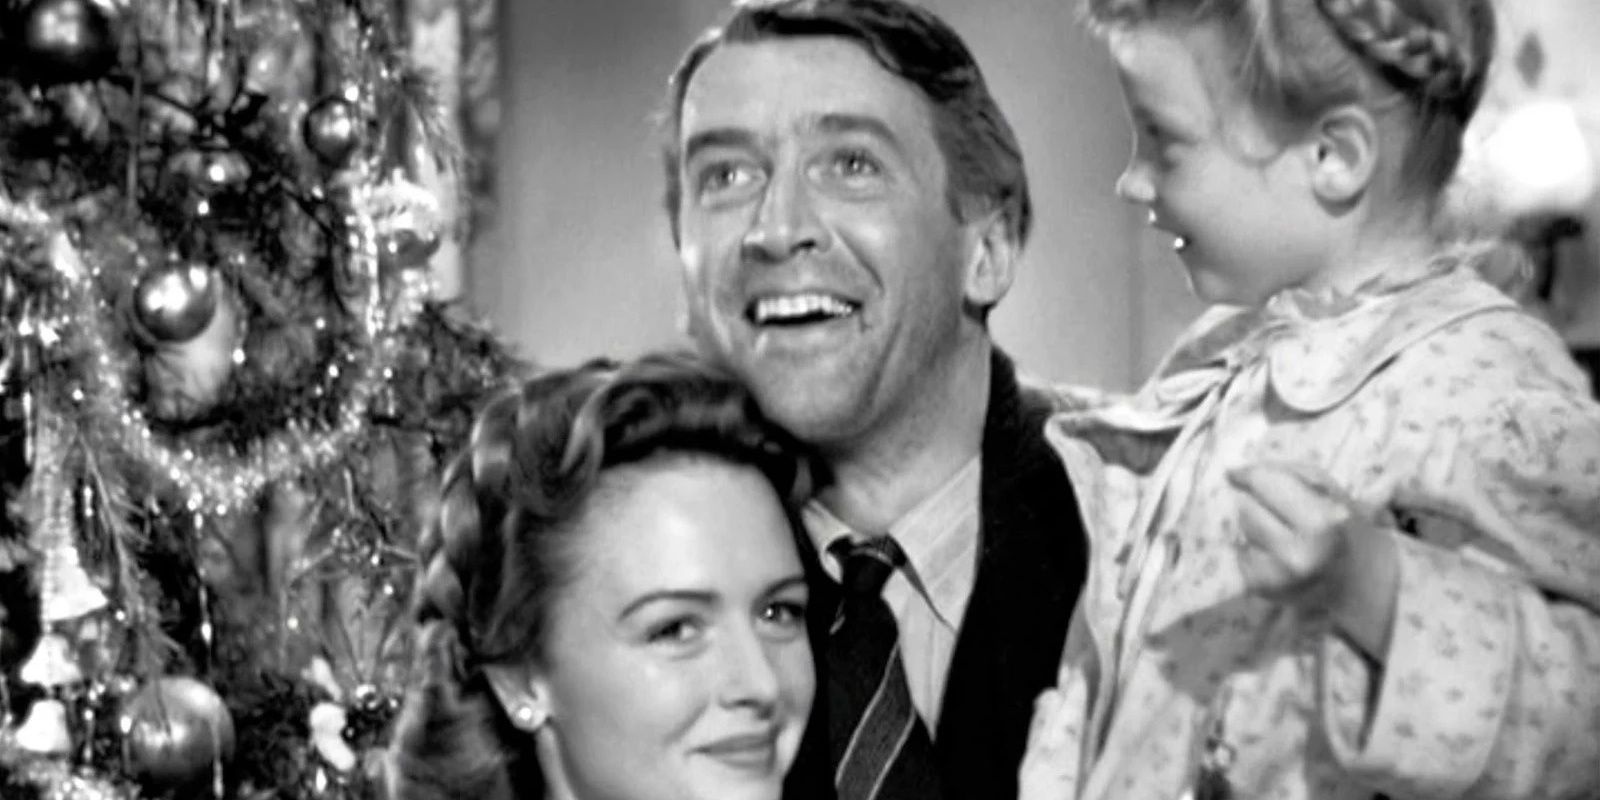 James Stewart as George Bailey with his family in It's a Wonderful Life during Christmas with a Christmas tree